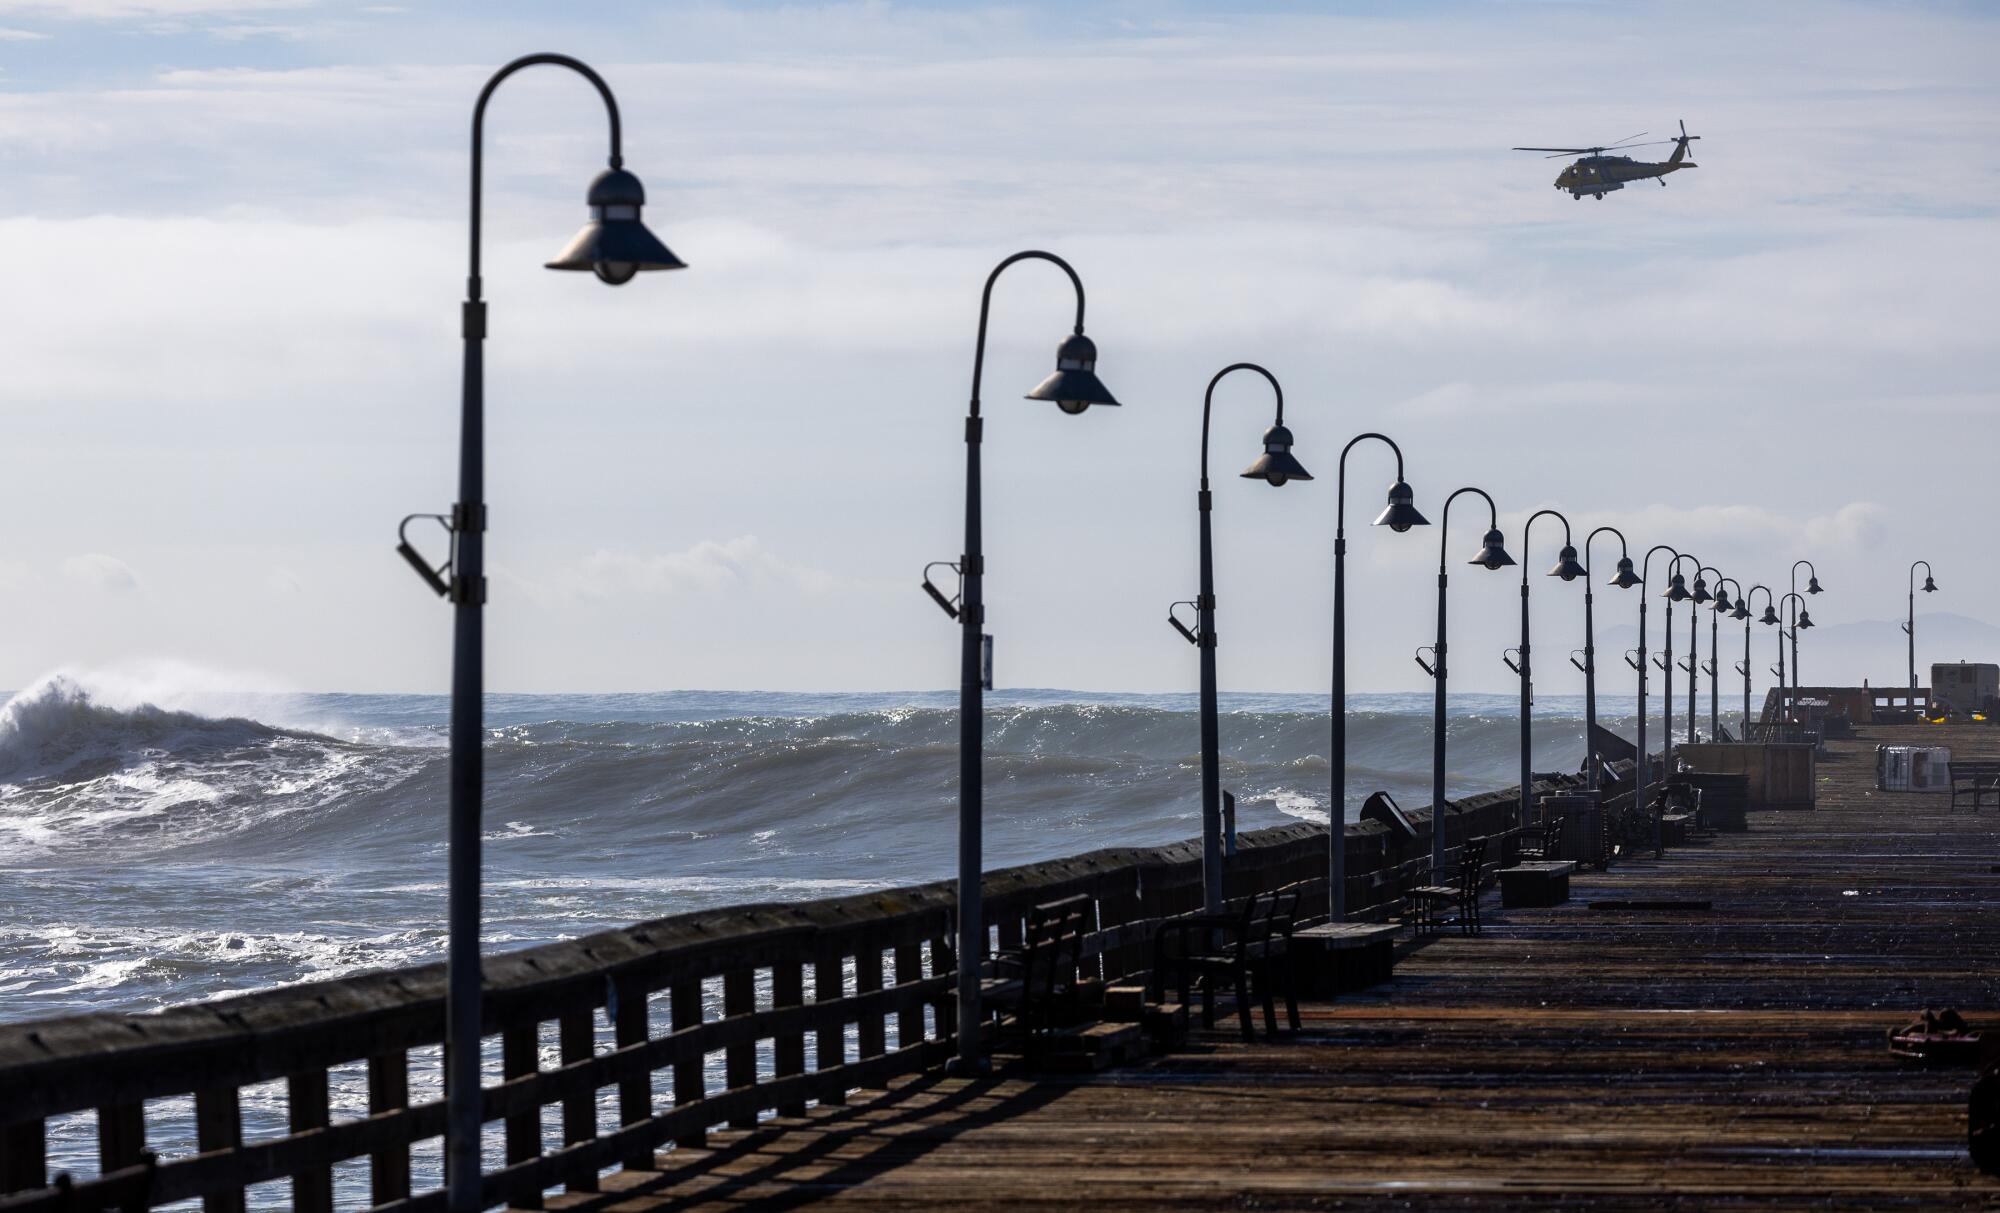 A helicopter flies above waves near a pier